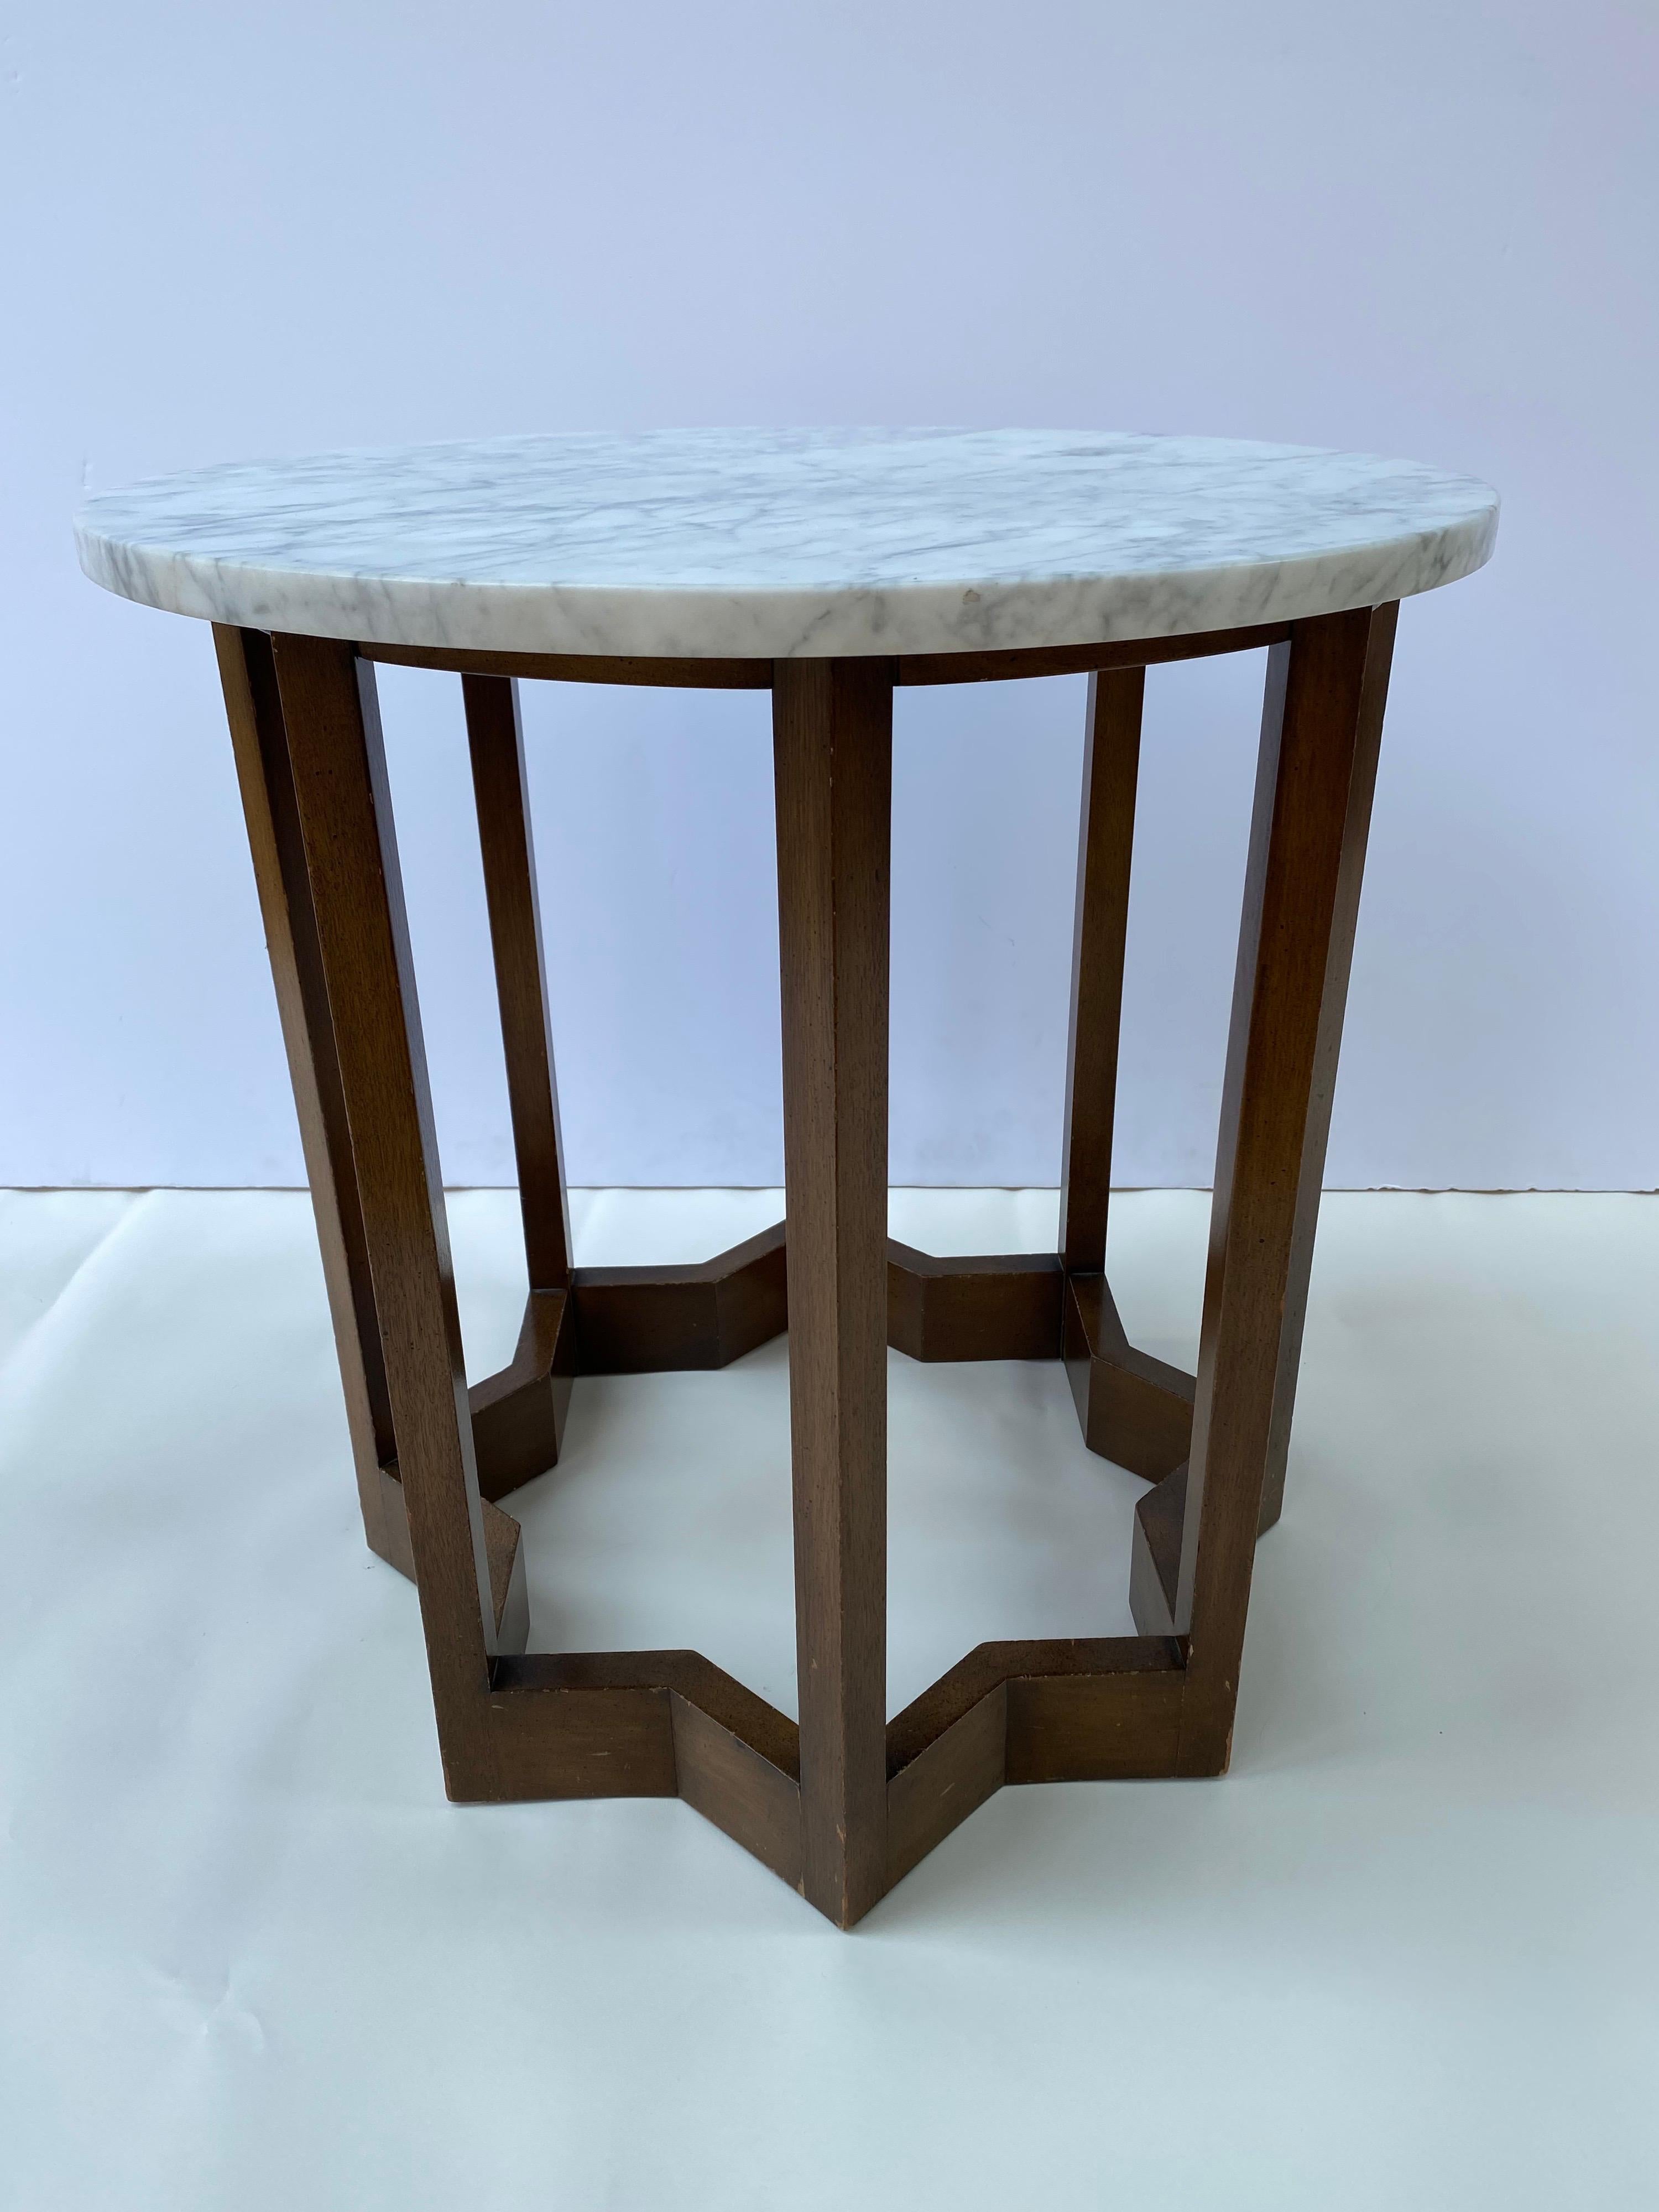 Harvey Probber Inspired Walnut Round Marble Table with a zig zag base. Very Sculptural and Interesting Base Design.